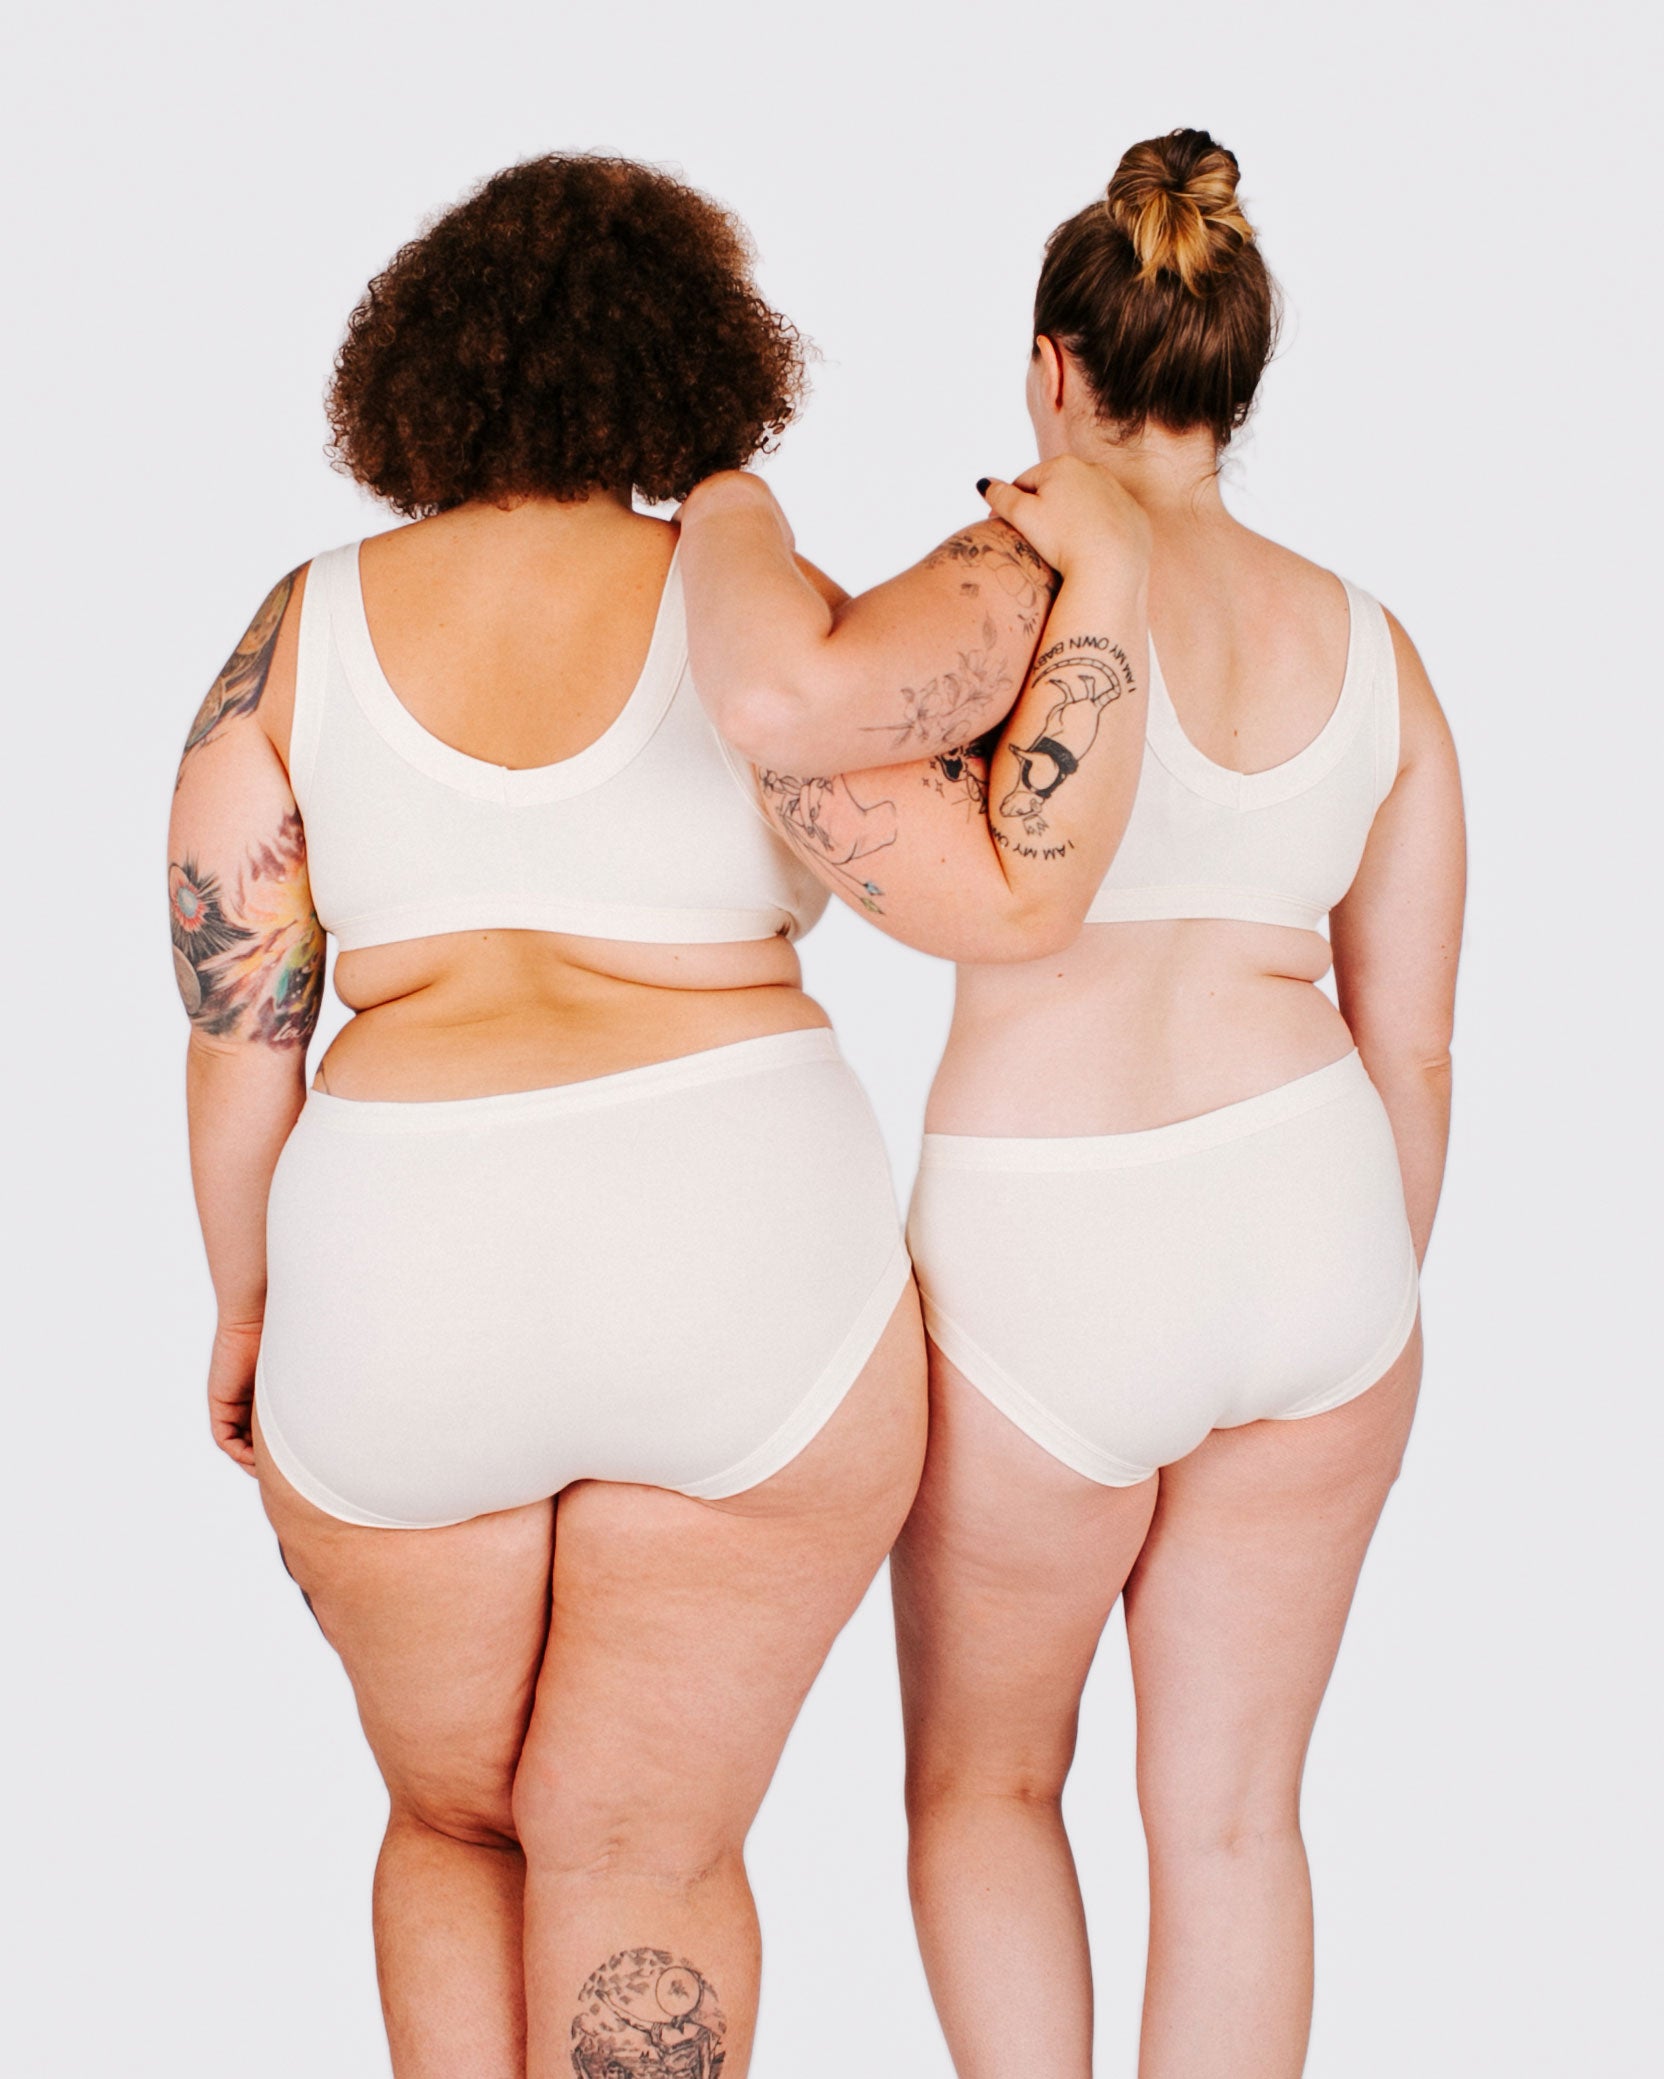 Fit photo from the back of Thunderpants organic cotton Hipster style underwear and Bralette in off-white on two models standing together.